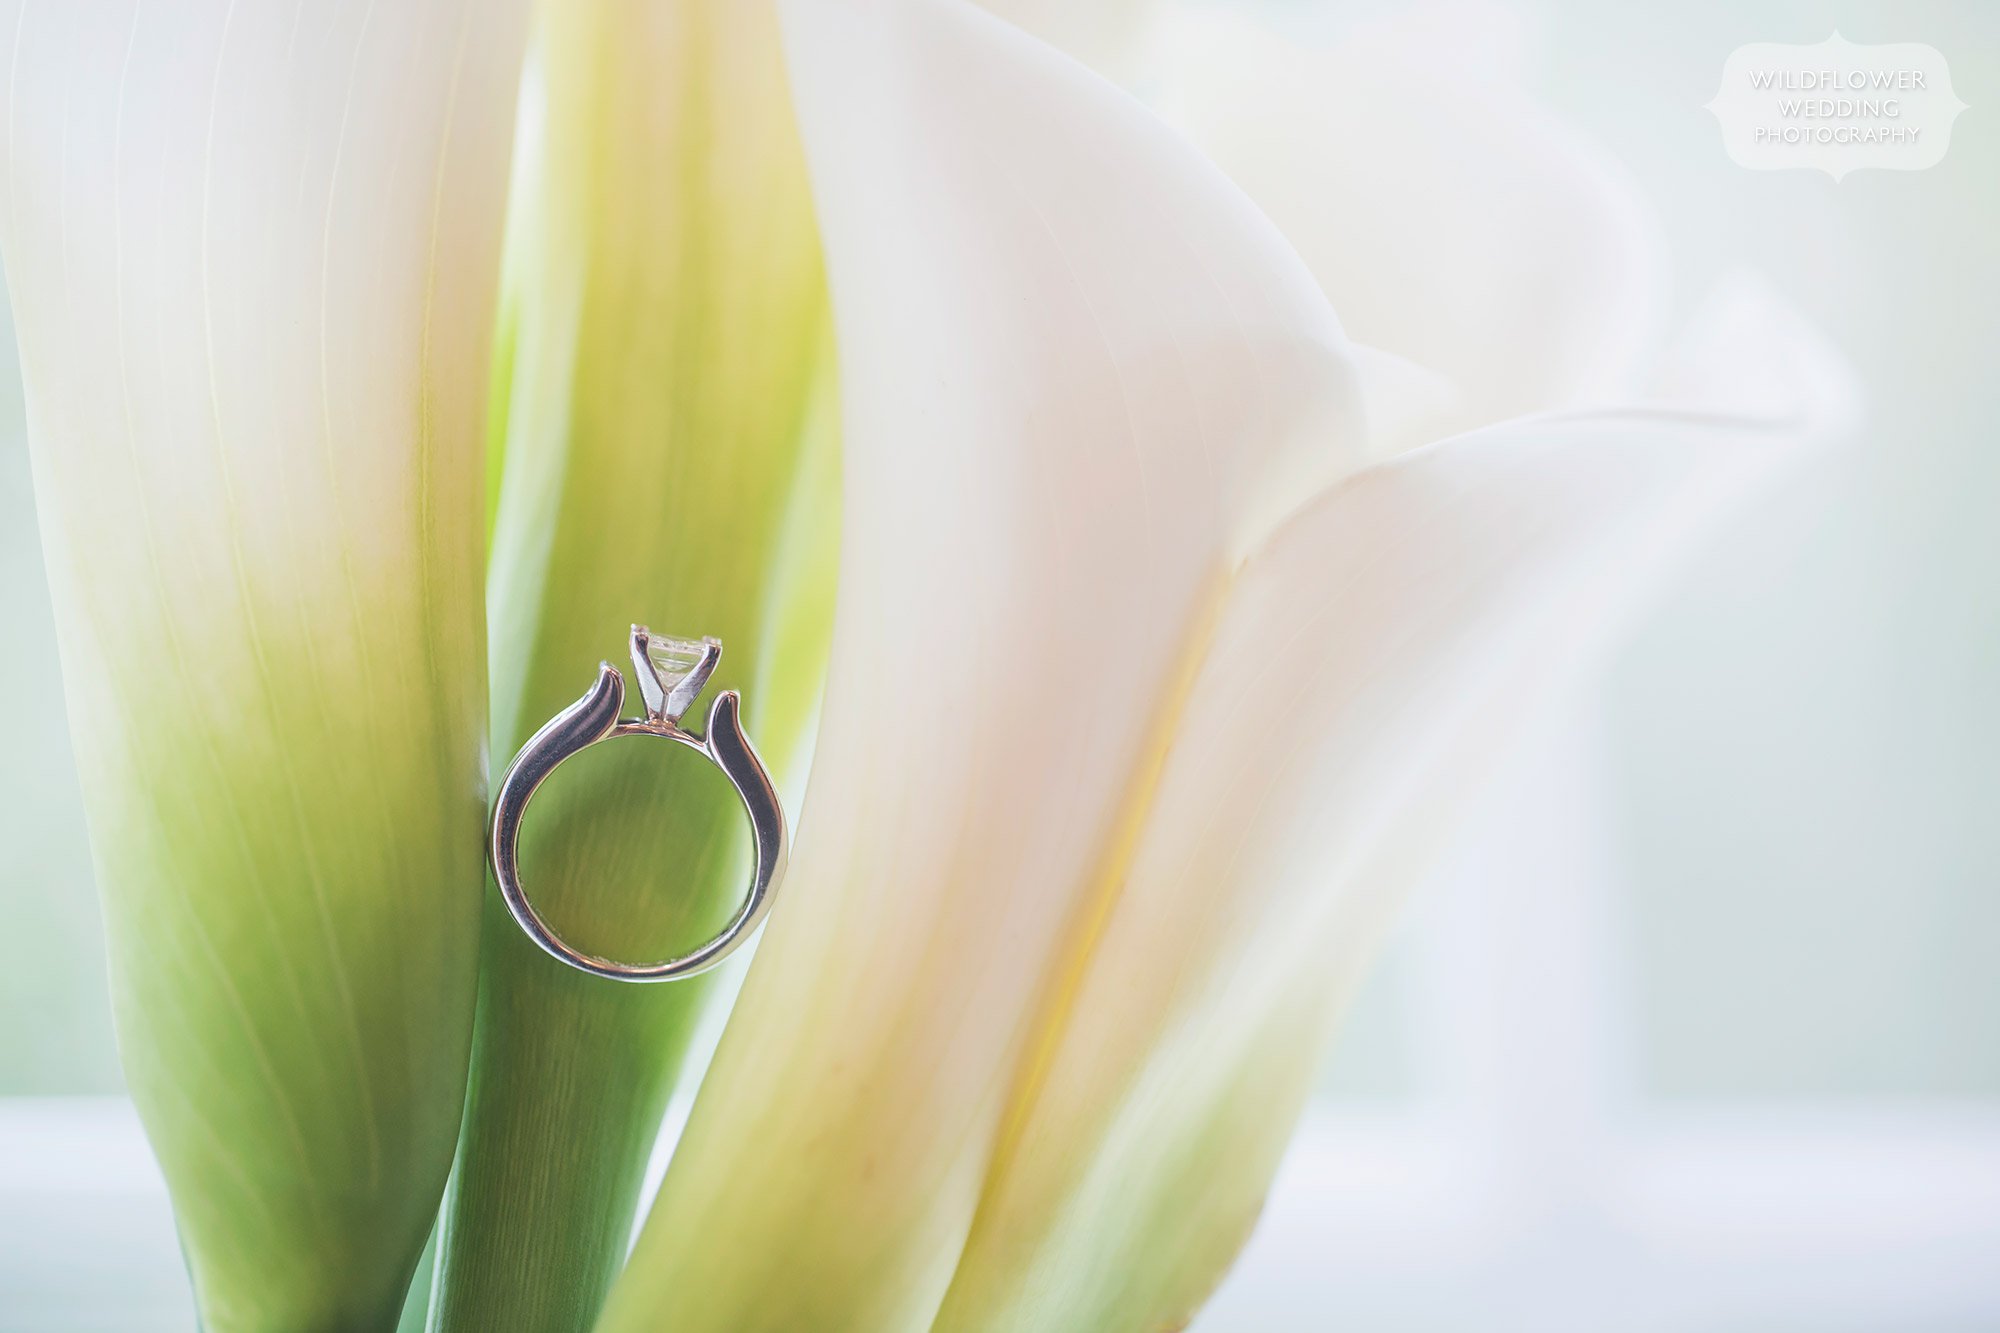 Artistic wedding photo of the bride's engagement ring between Calla Lilies at the Schwinn Barn.